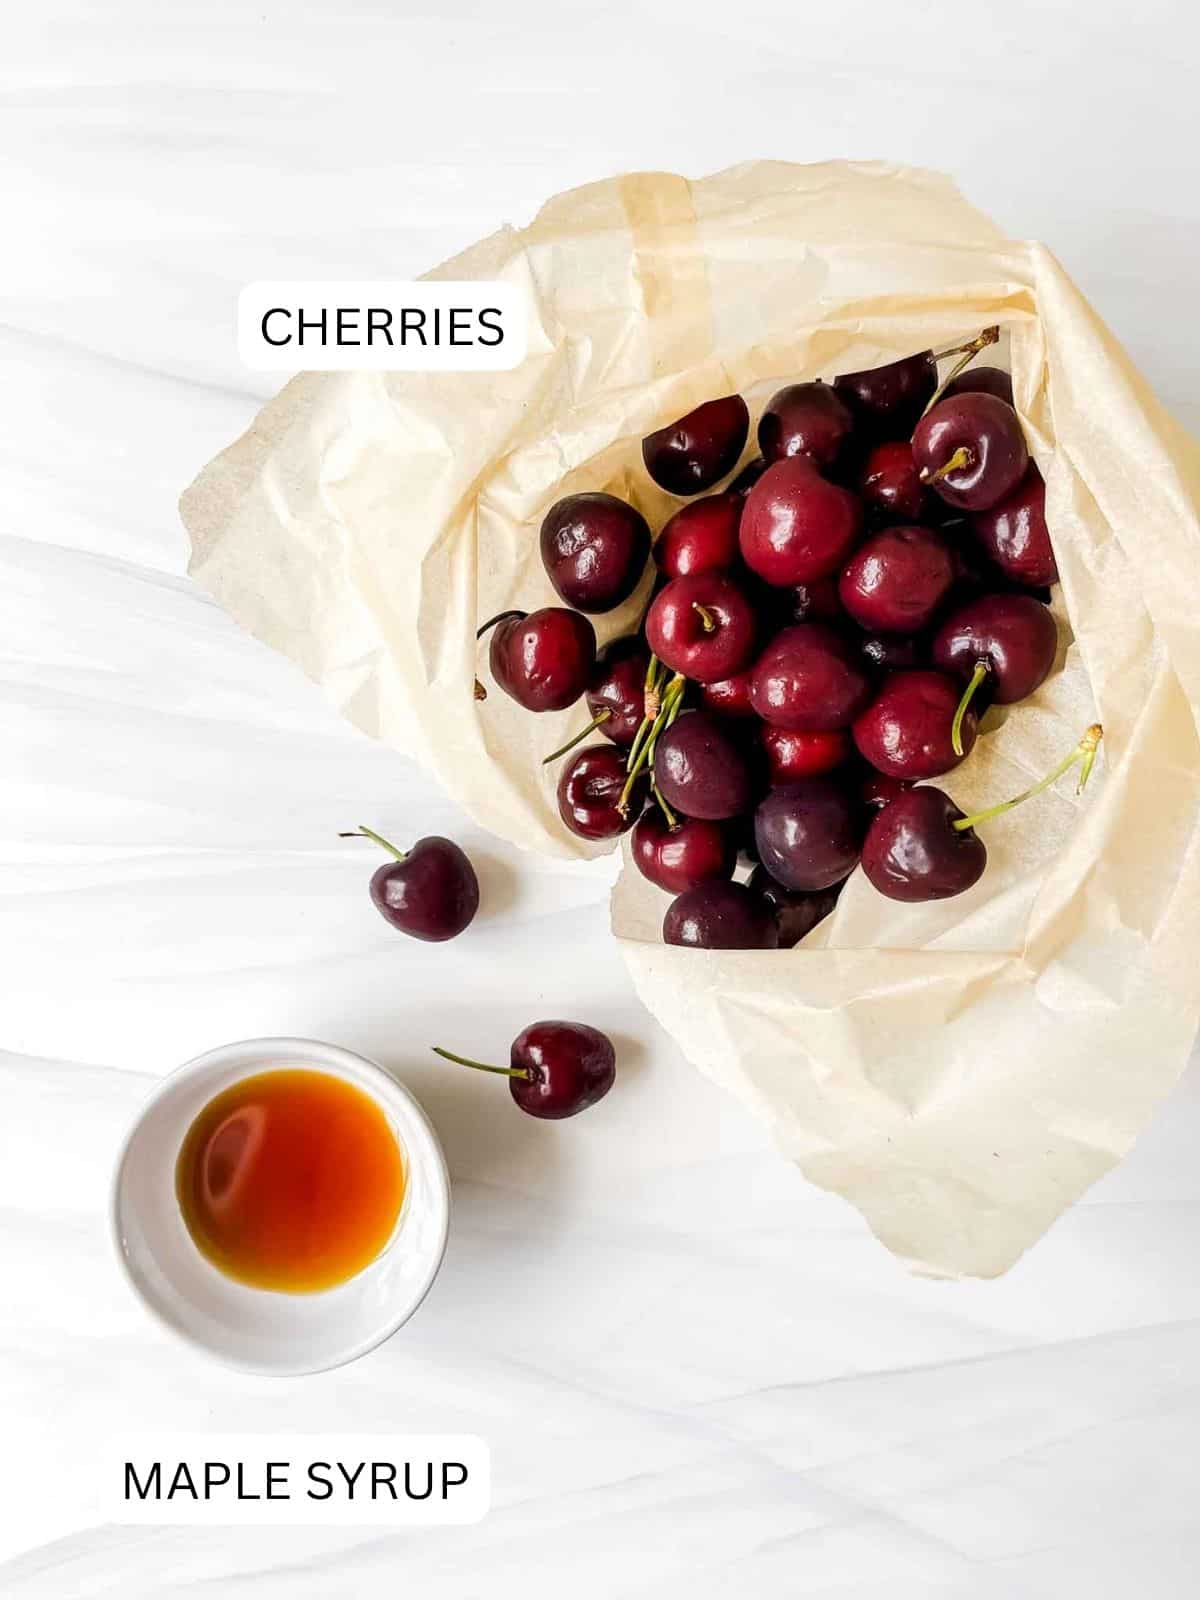 labelled cherries in a brown paper bag and maple syrup in a small white bowl.